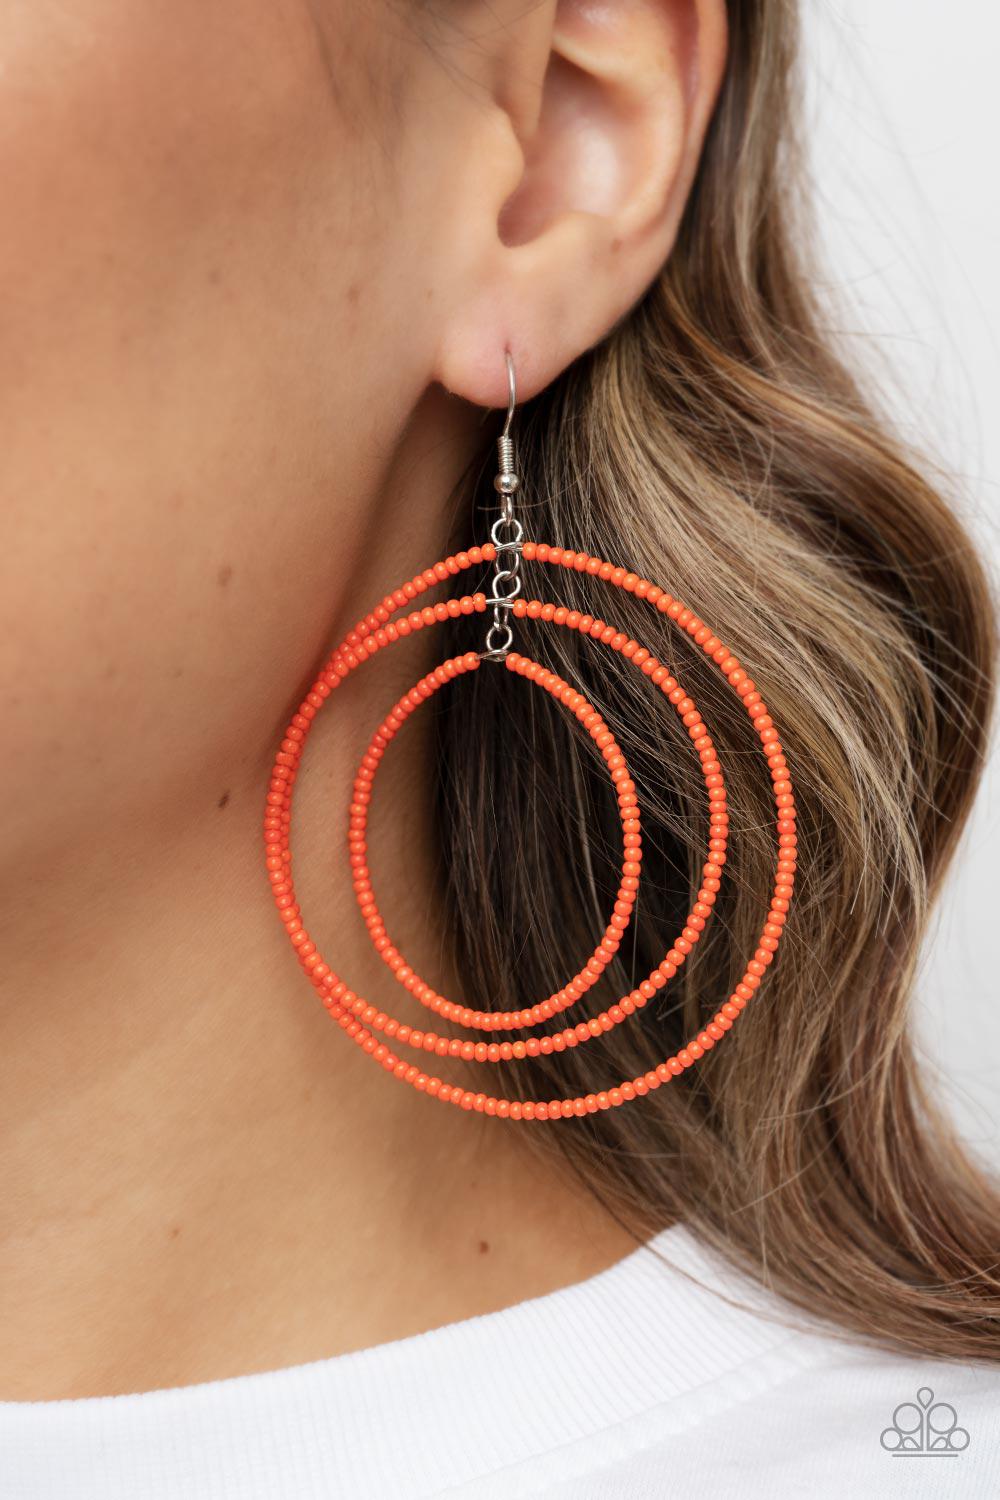 Colorfully Circulating Orange Seed Bead Earrings - Paparazzi Accessories-on model - CarasShop.com - $5 Jewelry by Cara Jewels